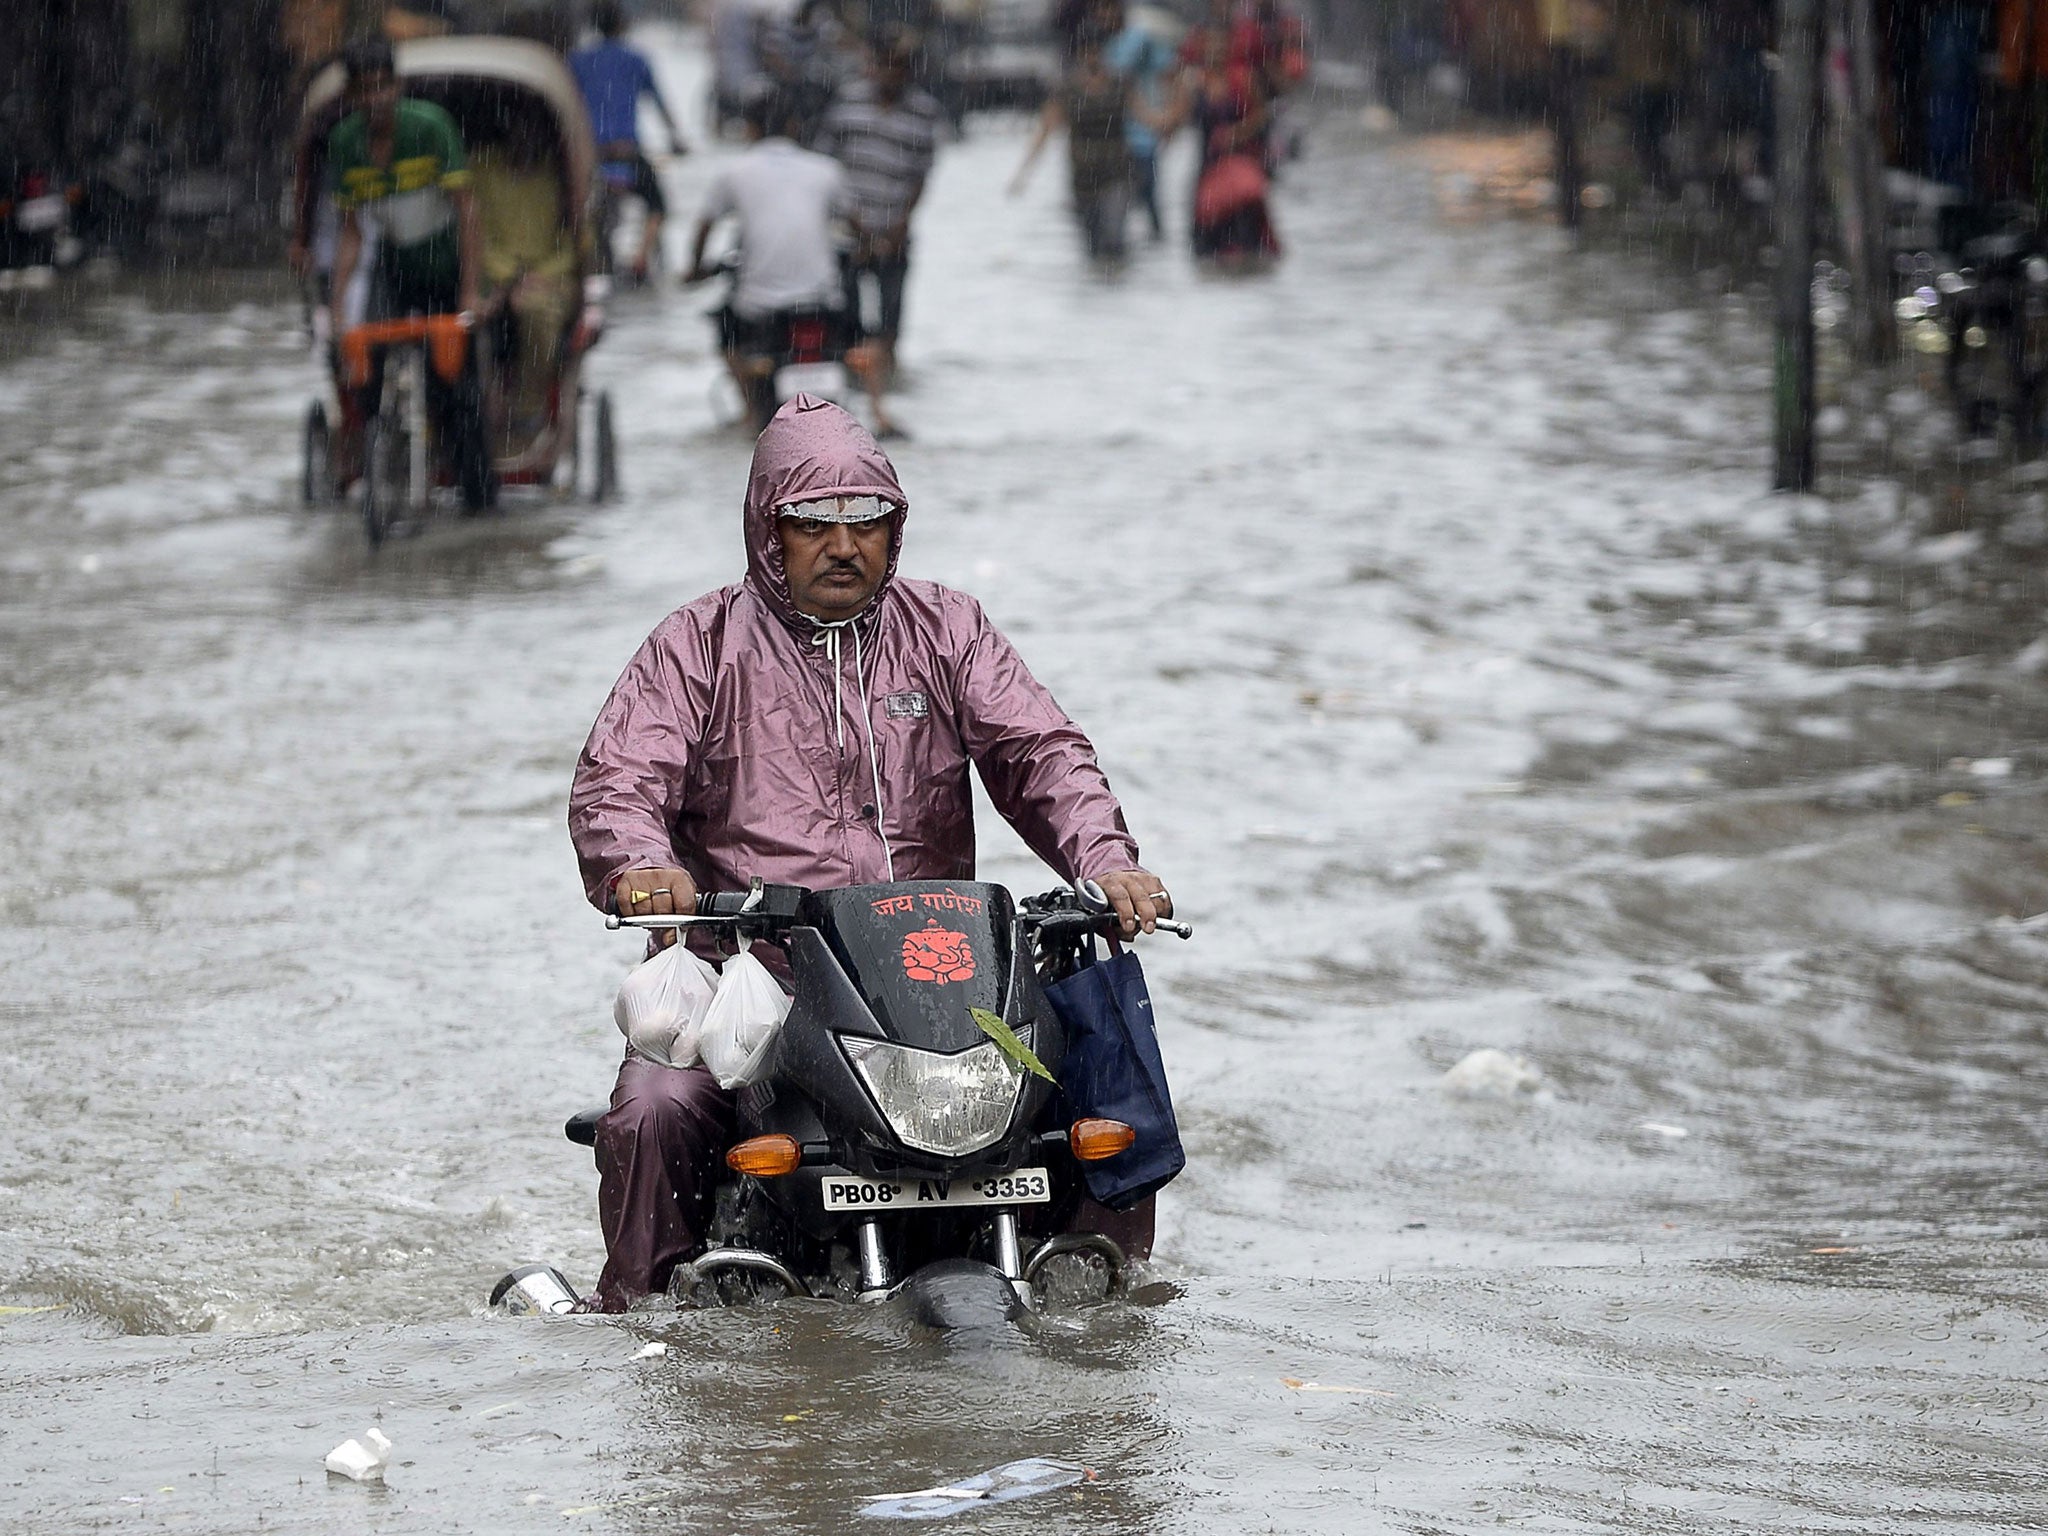 Heavy rains have caused rivers in places such as Jalandhar, Punjab, to burst their banks